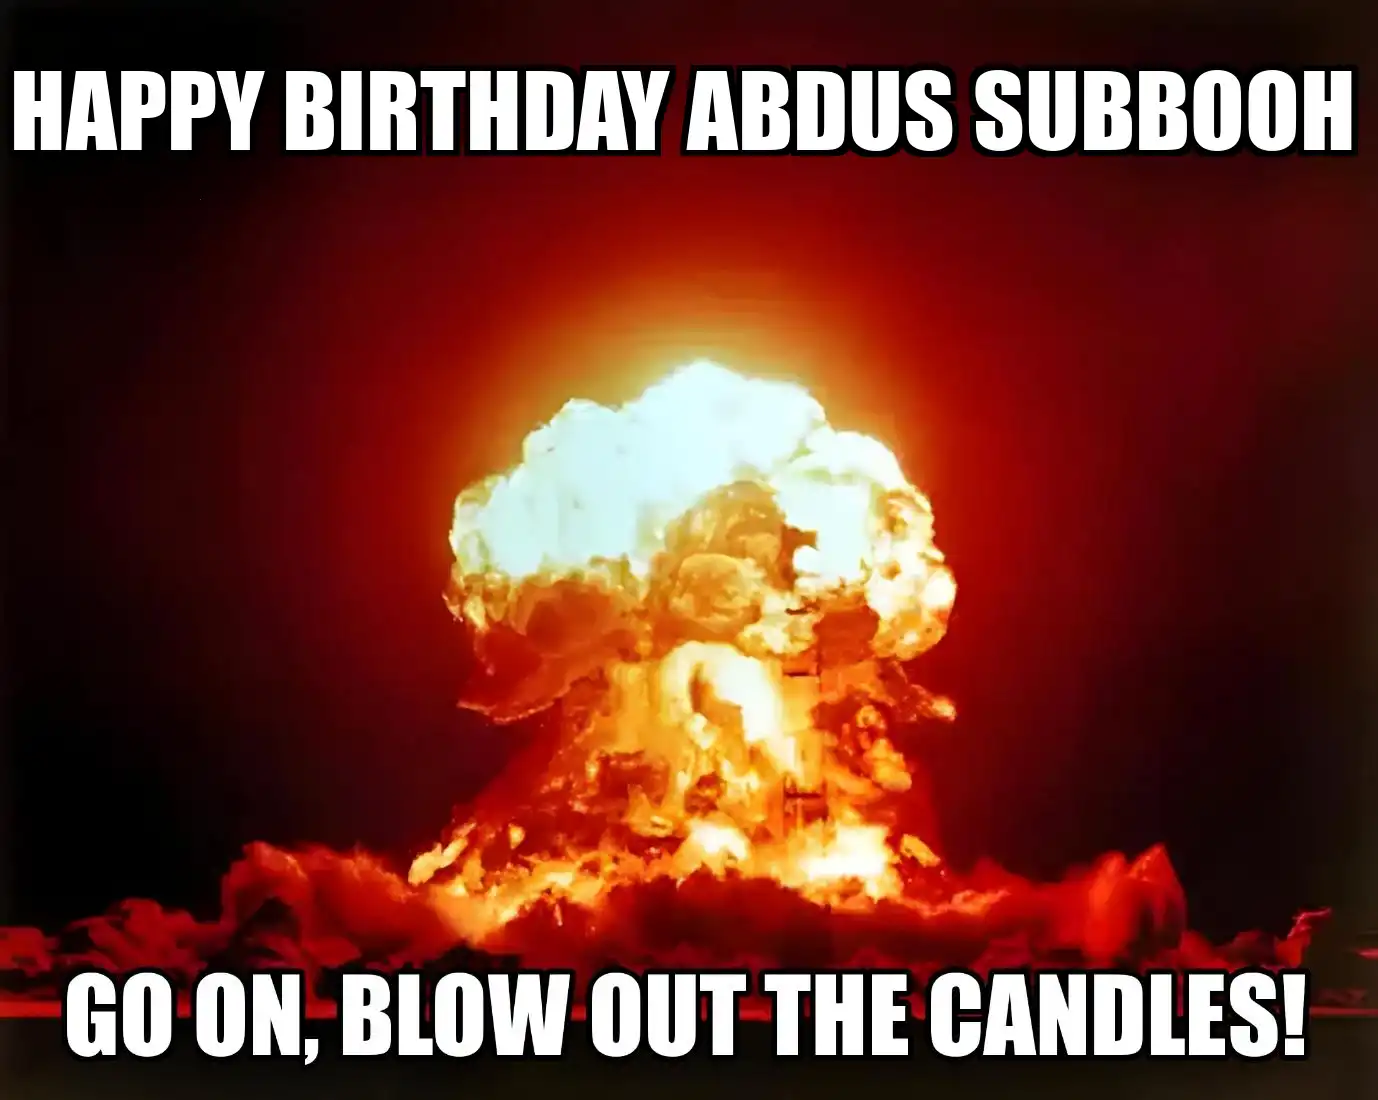 Happy Birthday Abdus Subbooh Go On Blow Out The Candles Meme